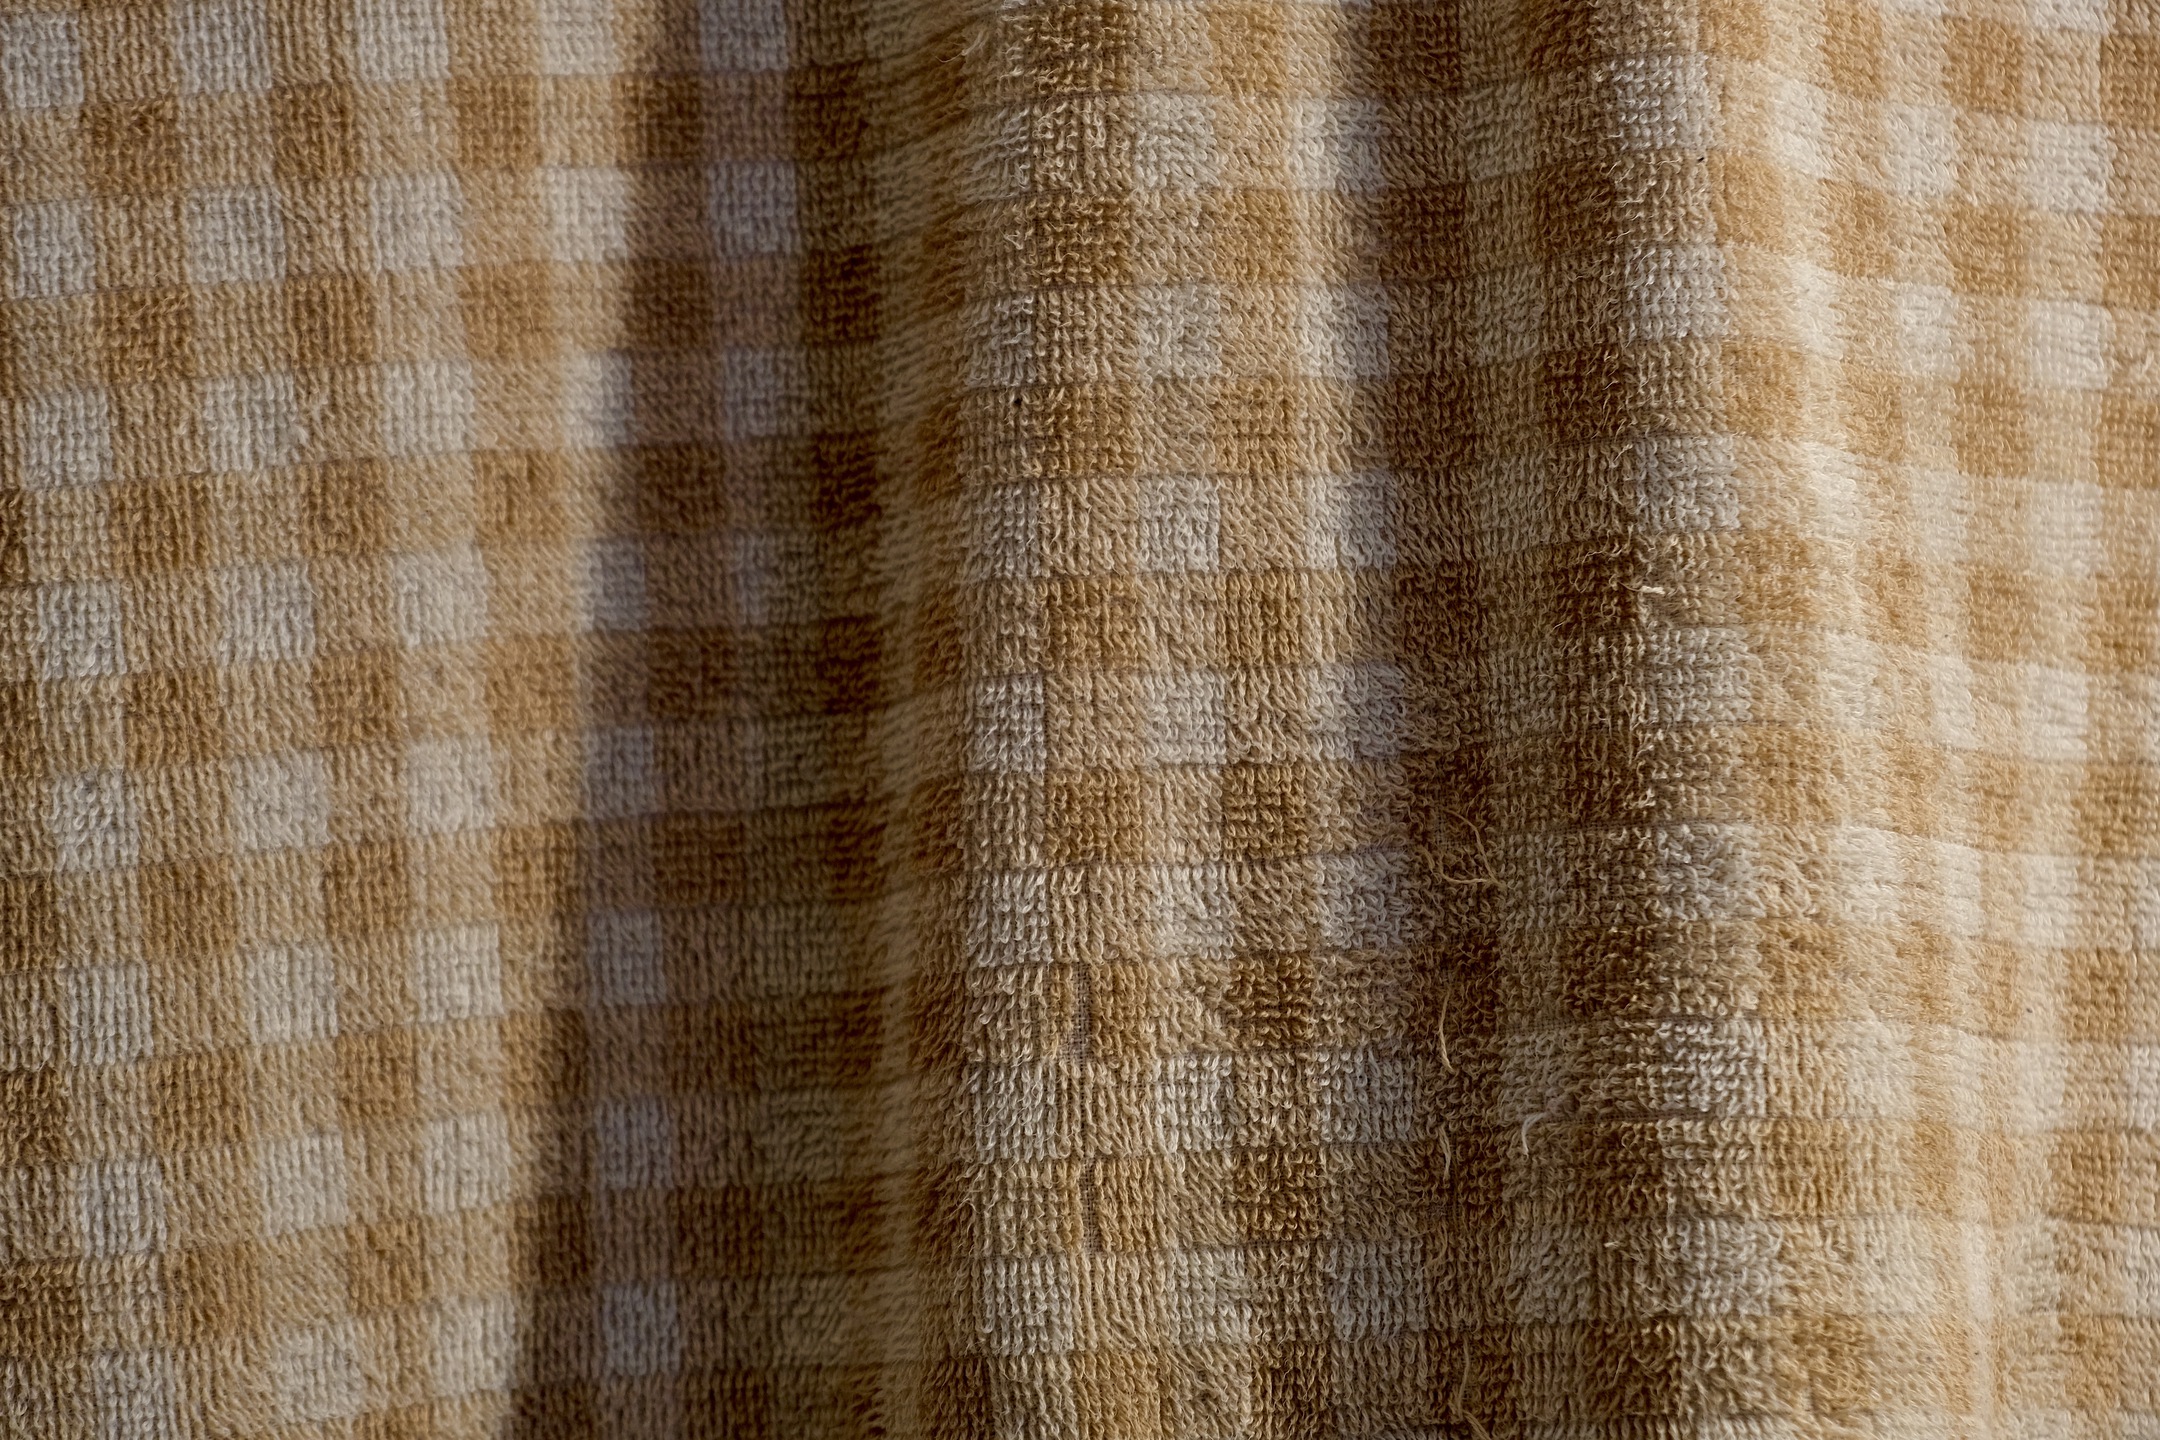 A towel with white and off-white checkered pattern hanging with slight frills—forming shadows.